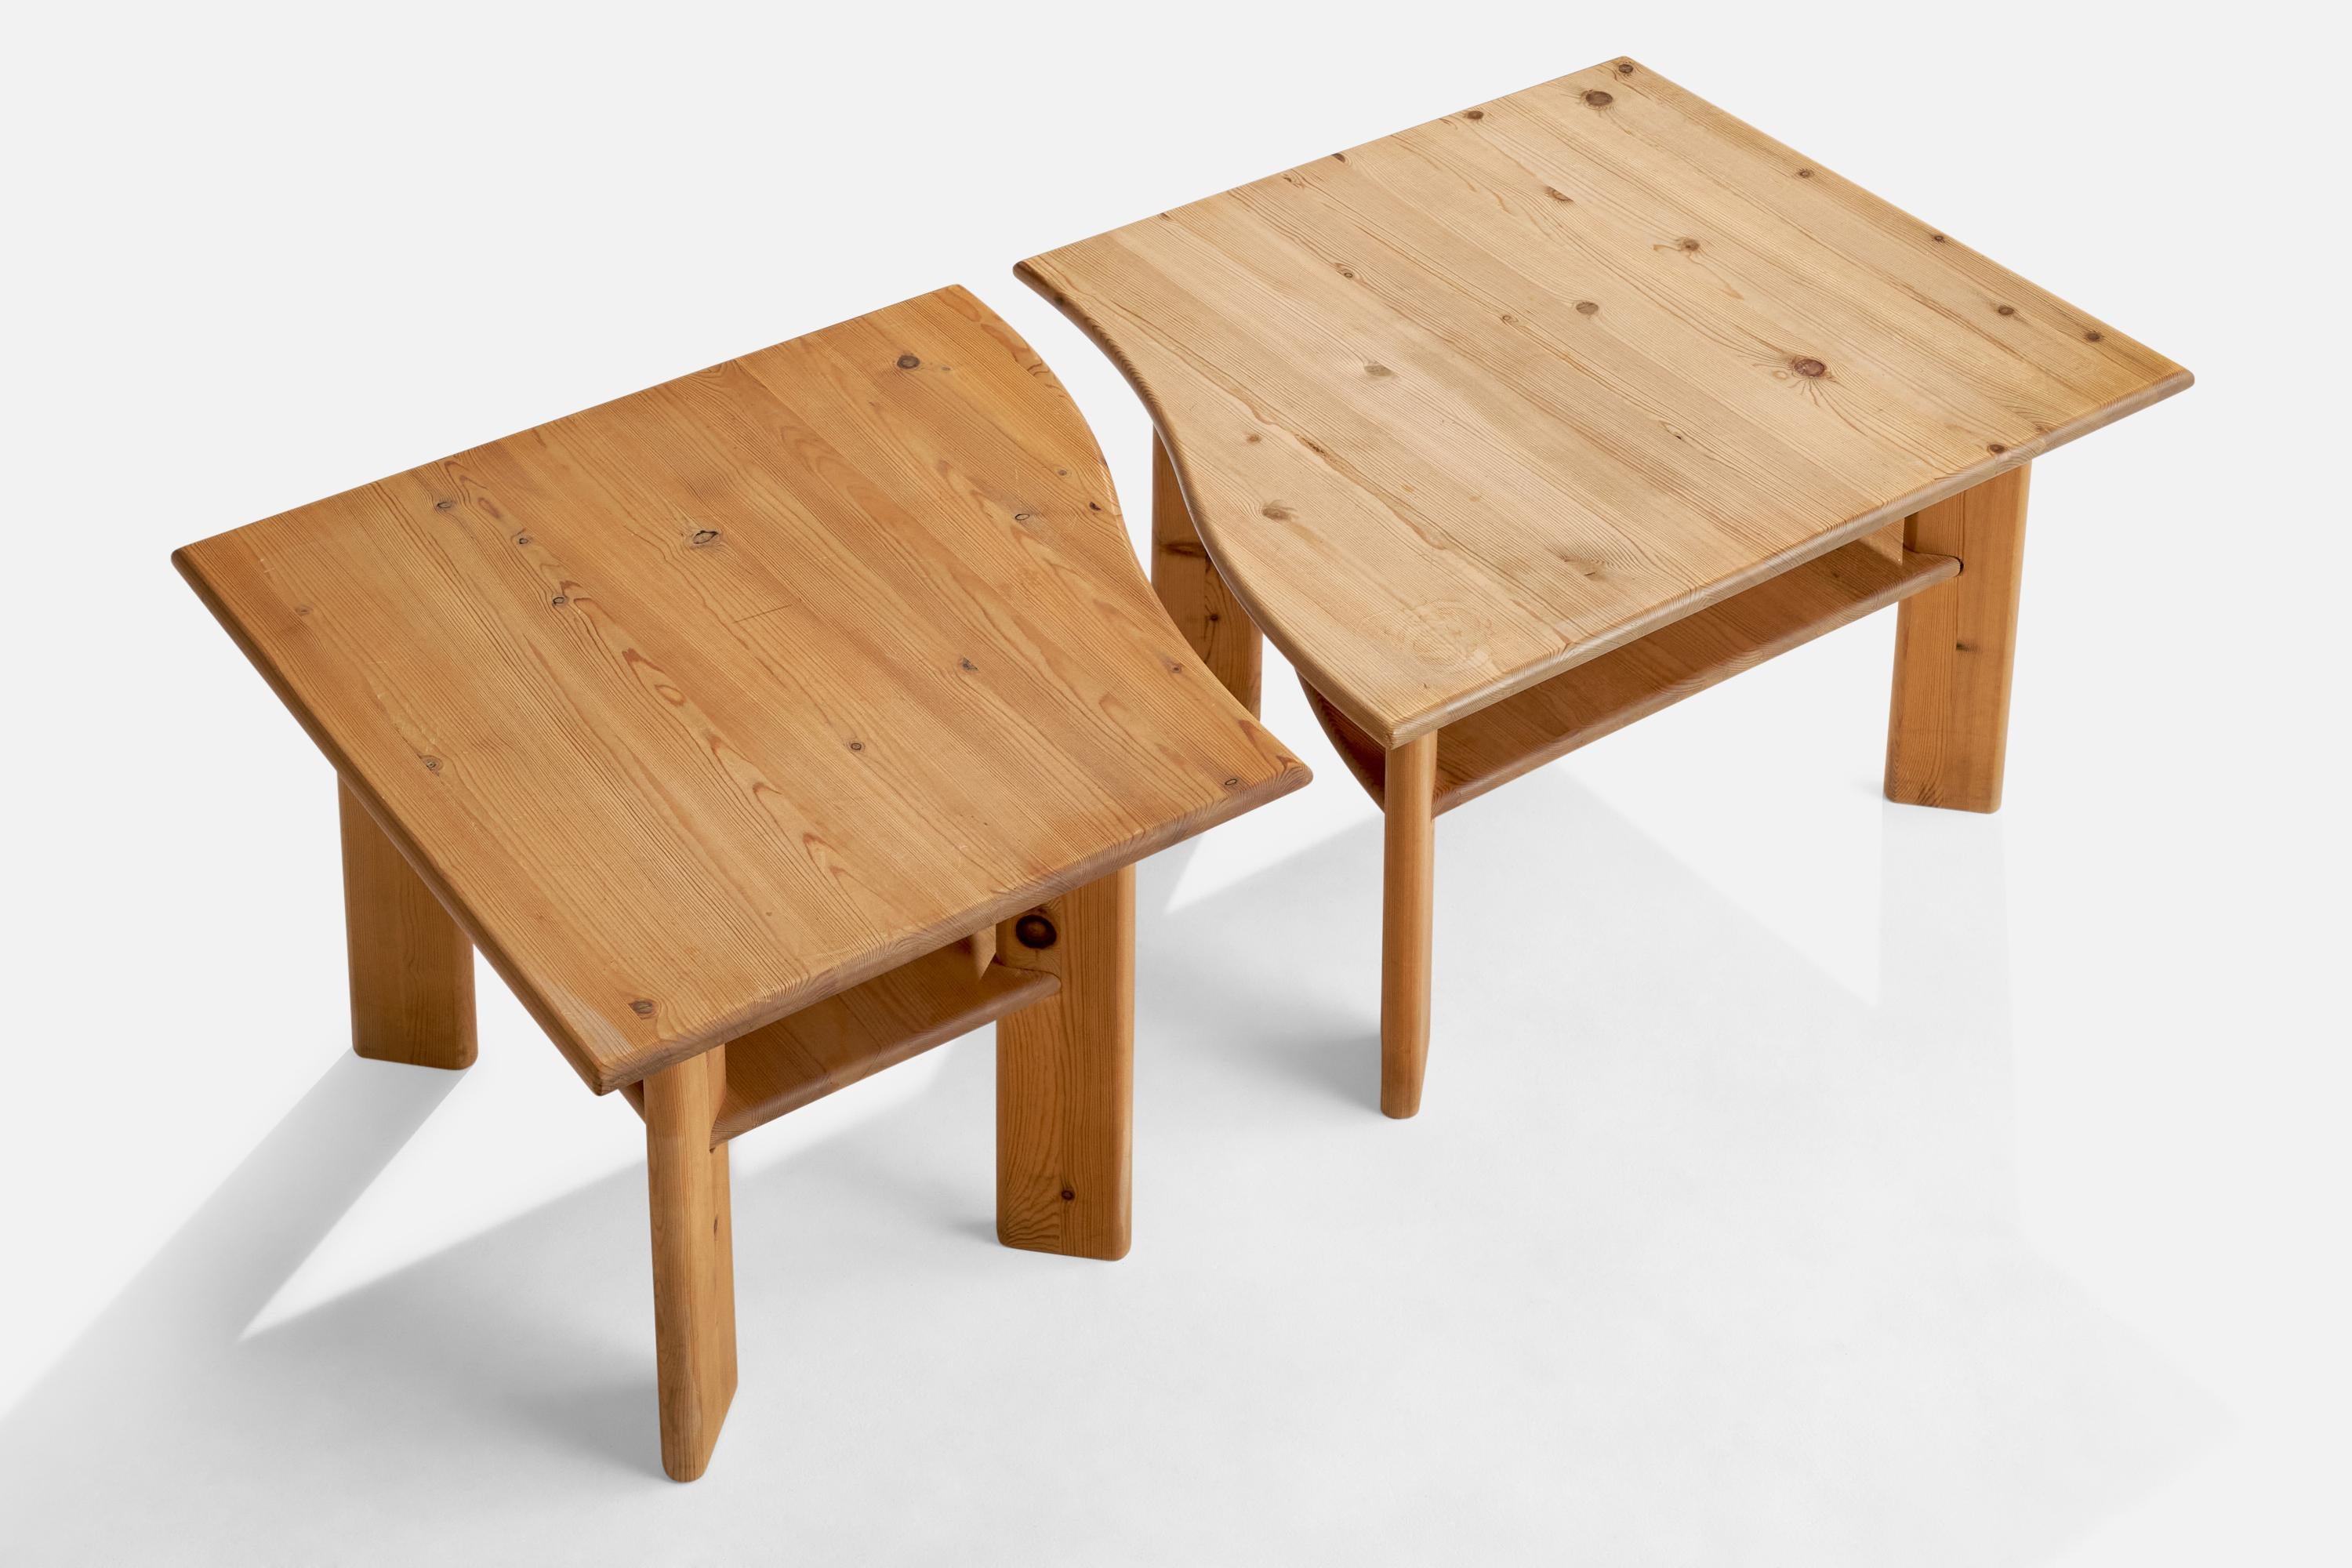 A pair of pine side tables or coffee tables designed by Aksel Kjersgaard and produced by Odder, Denmark, 1970s.

Dimensions of first half 
19.5” H x 35” W x 27.5” D

Dimensions of second half 
19.5” H x 27.25” W x 27.5” D